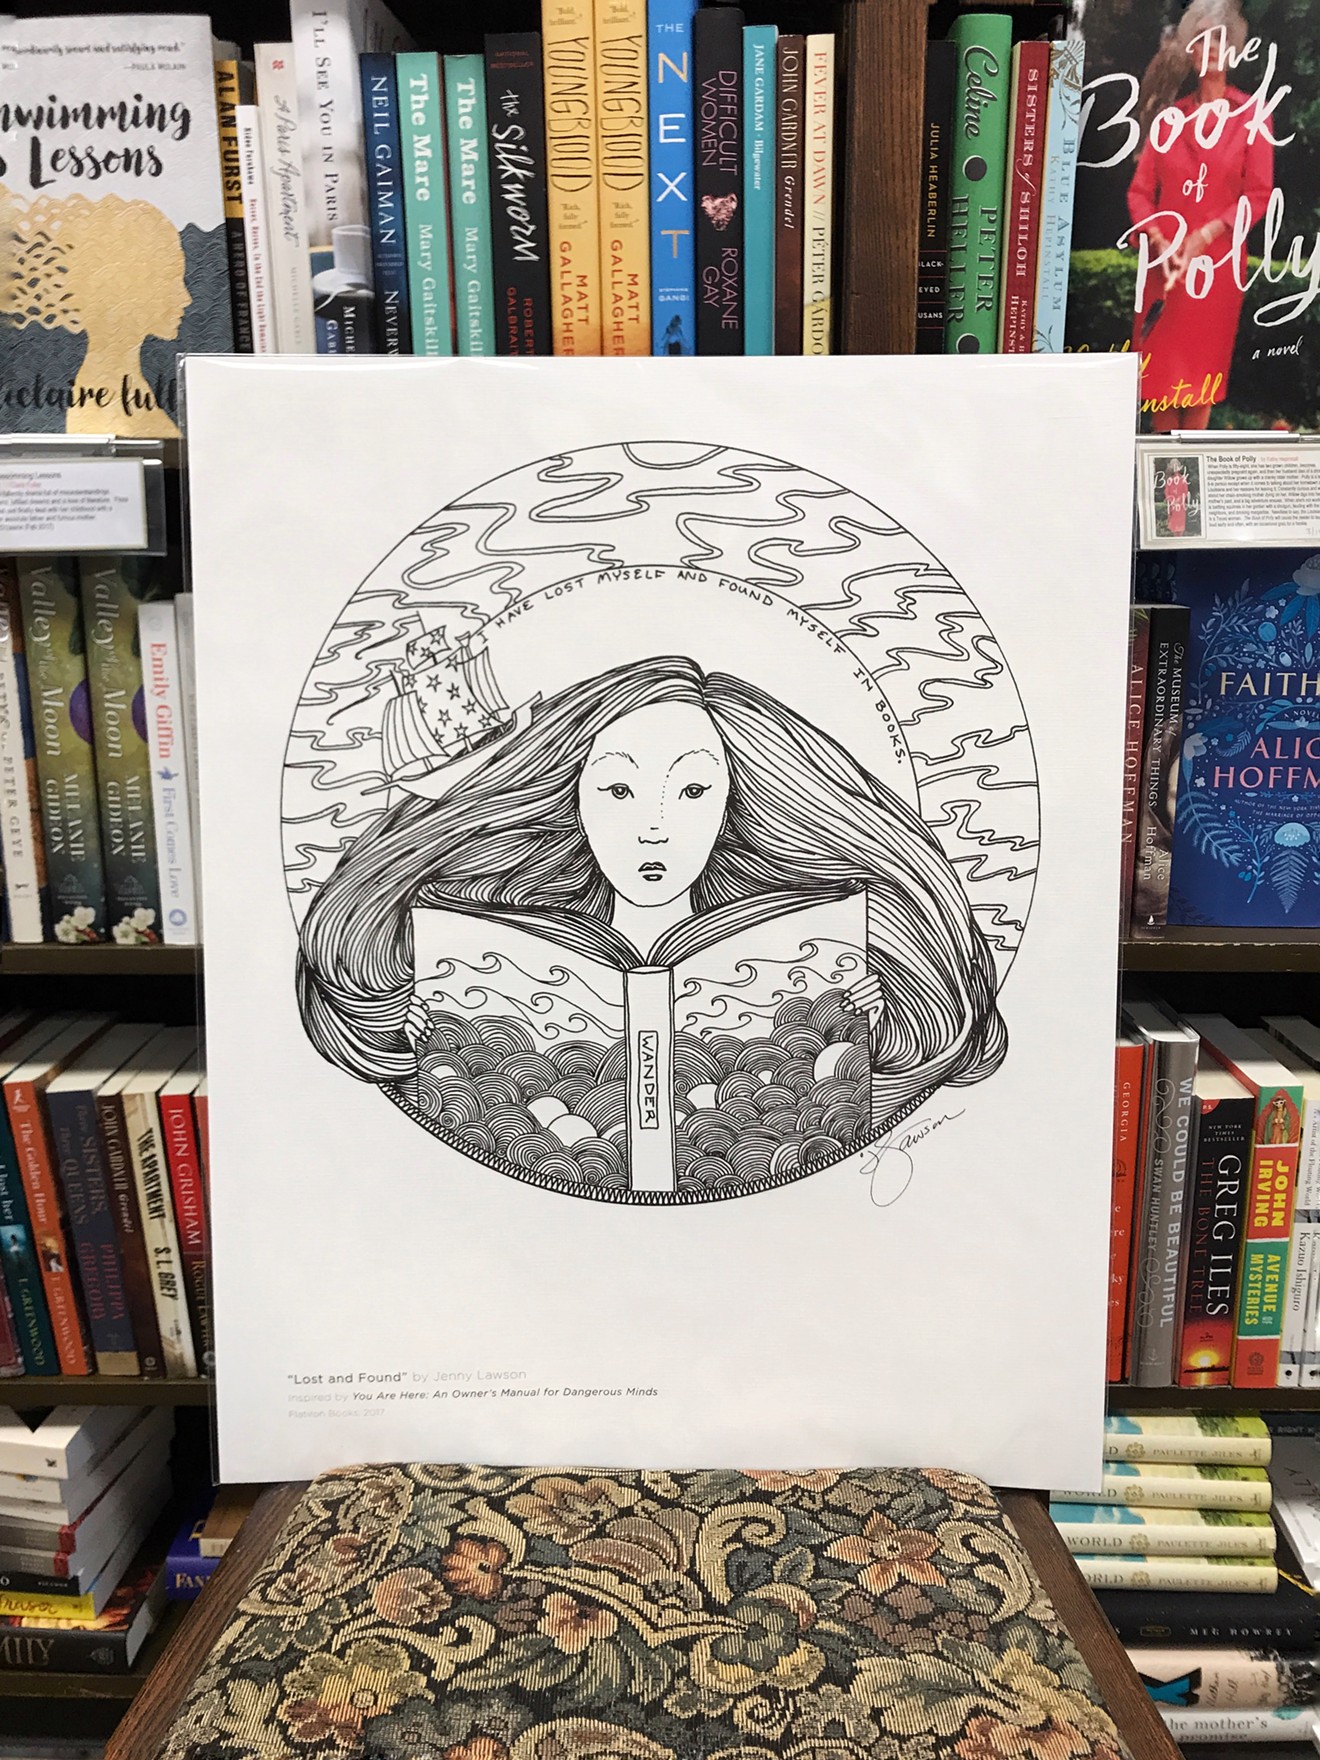 "Lost and Found," a signed, original print by Jenny Lawson, will be available, in-store only, at Blue Willow Bookshop.